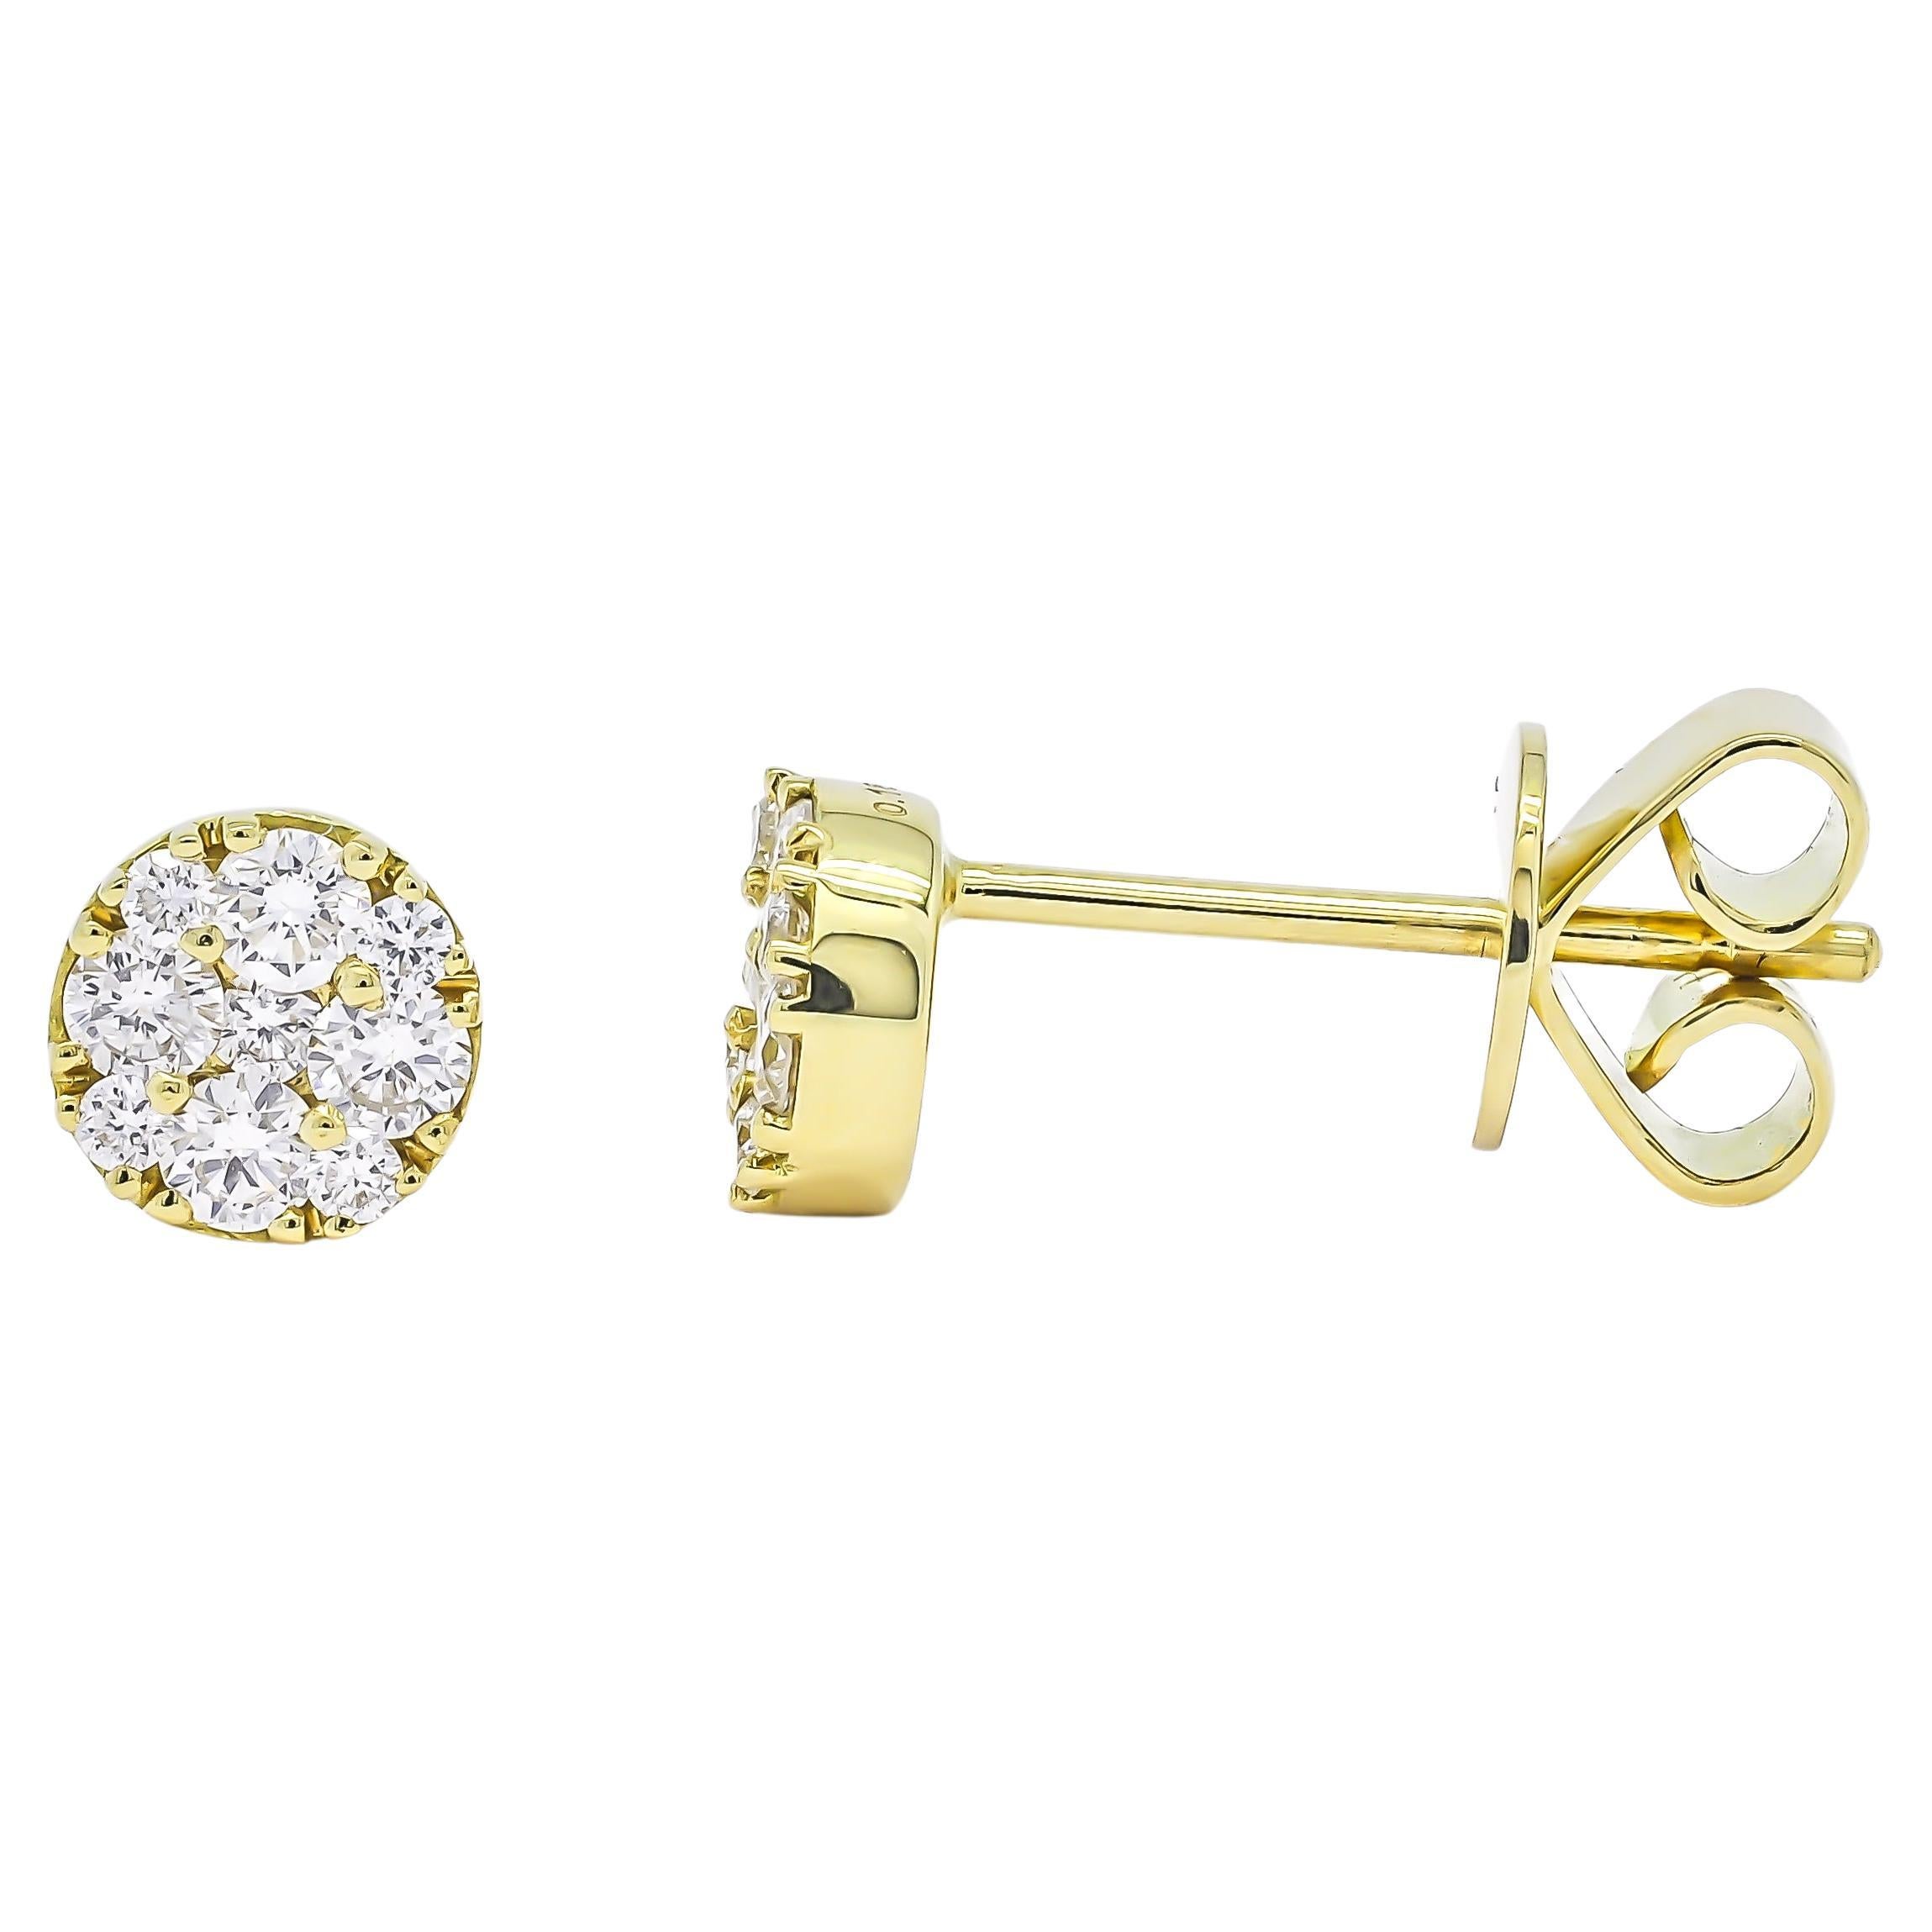  Natural Diamonds 0.40 cts 18 Kt Yellow Gold Modern Stud Earrings